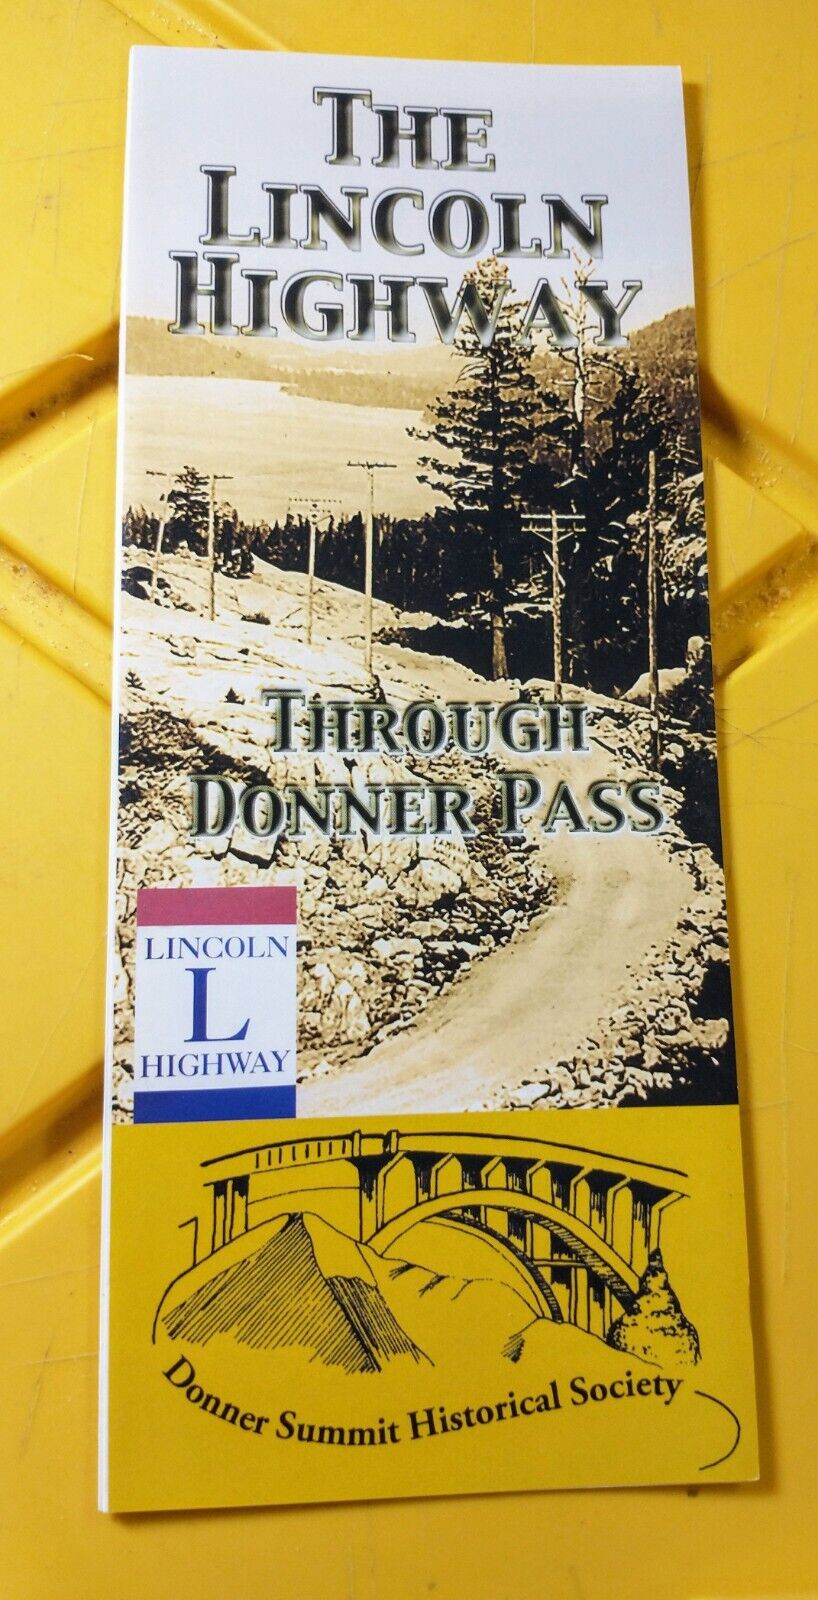 The LINCOLN HIGHWAY THROUGH DONNER PASS MAP AND GUIDE 